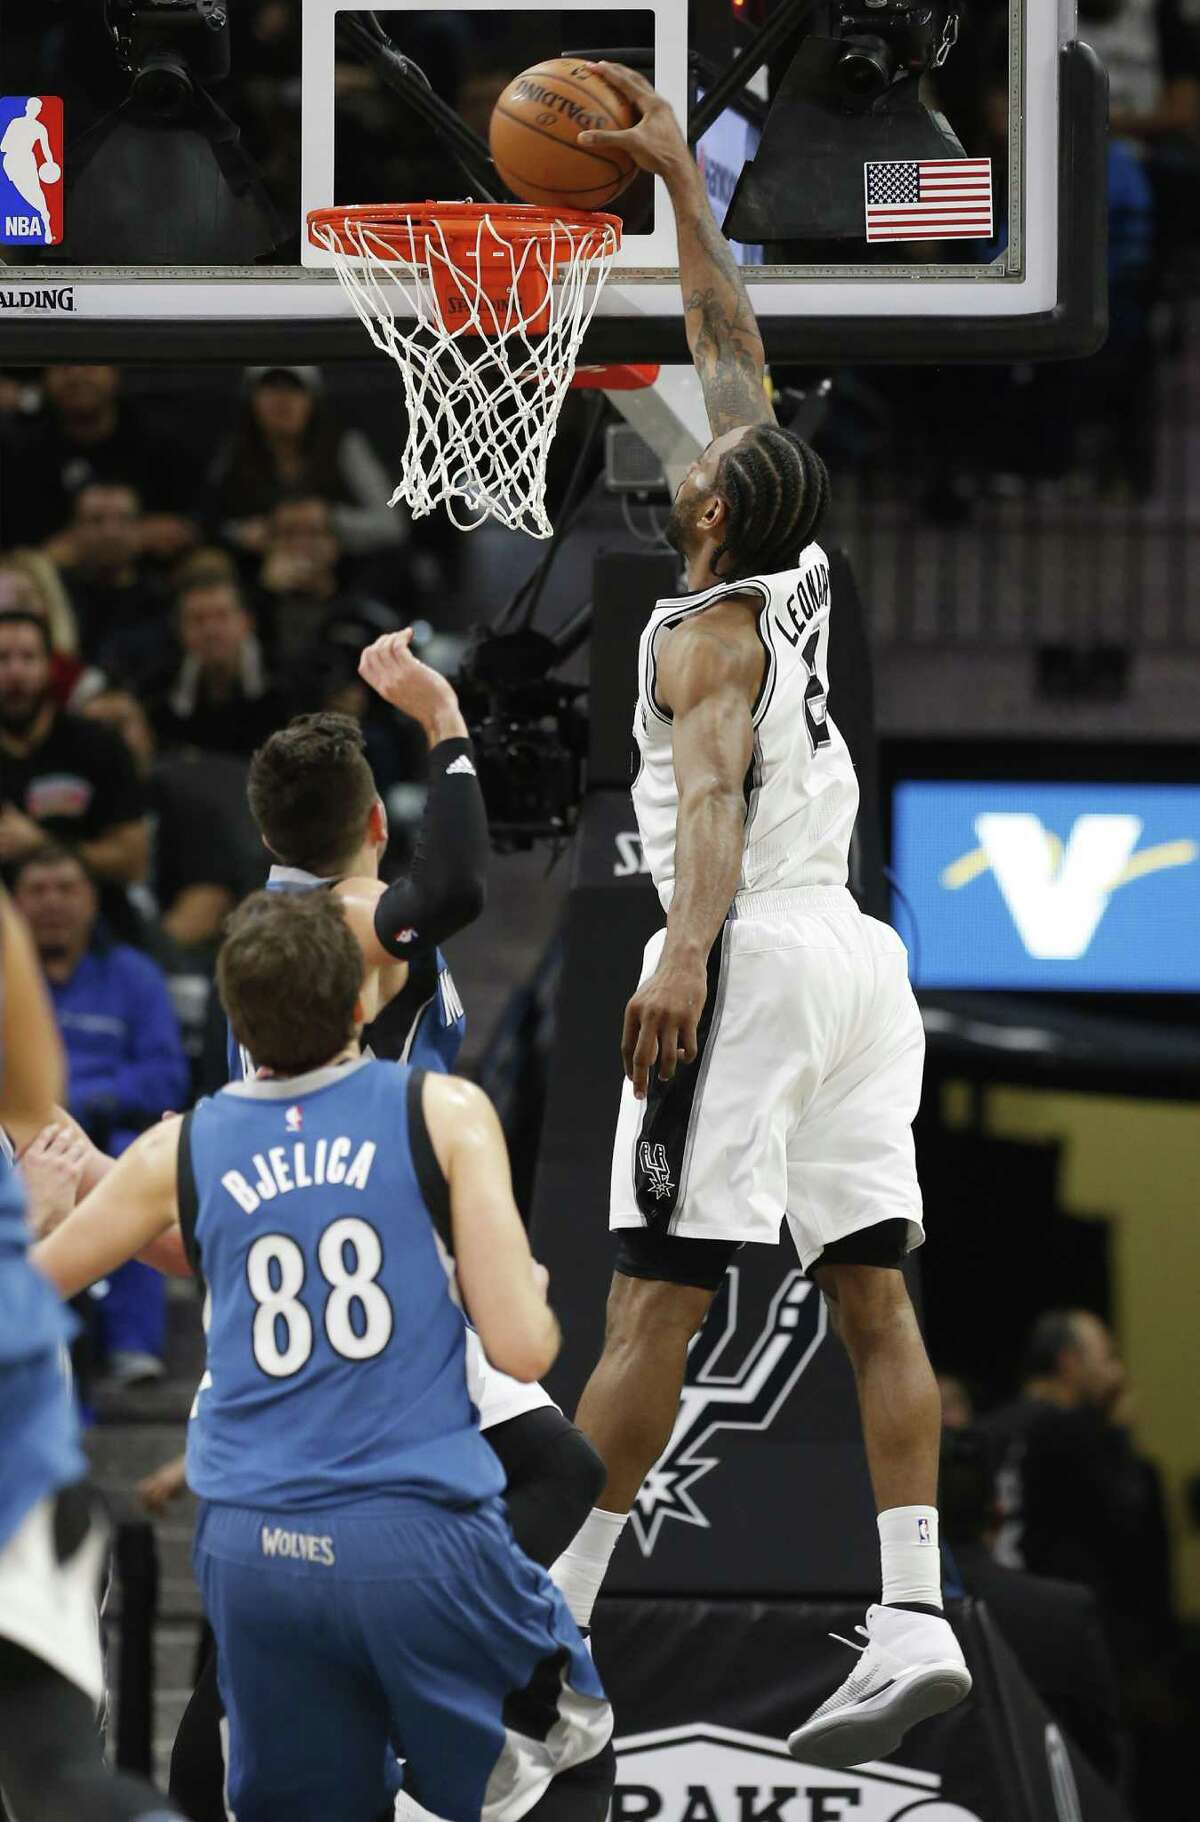 Spurs' Kawhi Leonard (02) goes in for a dunk against Minnesota Timberwolves' Ricky Rubio (09) during their game at the AT&T Center on Tuesday, Jan. 17, 2017. Spurs defeated the Timberwolves, 122-114. (Kin Man Hui/San Antonio Express-News)